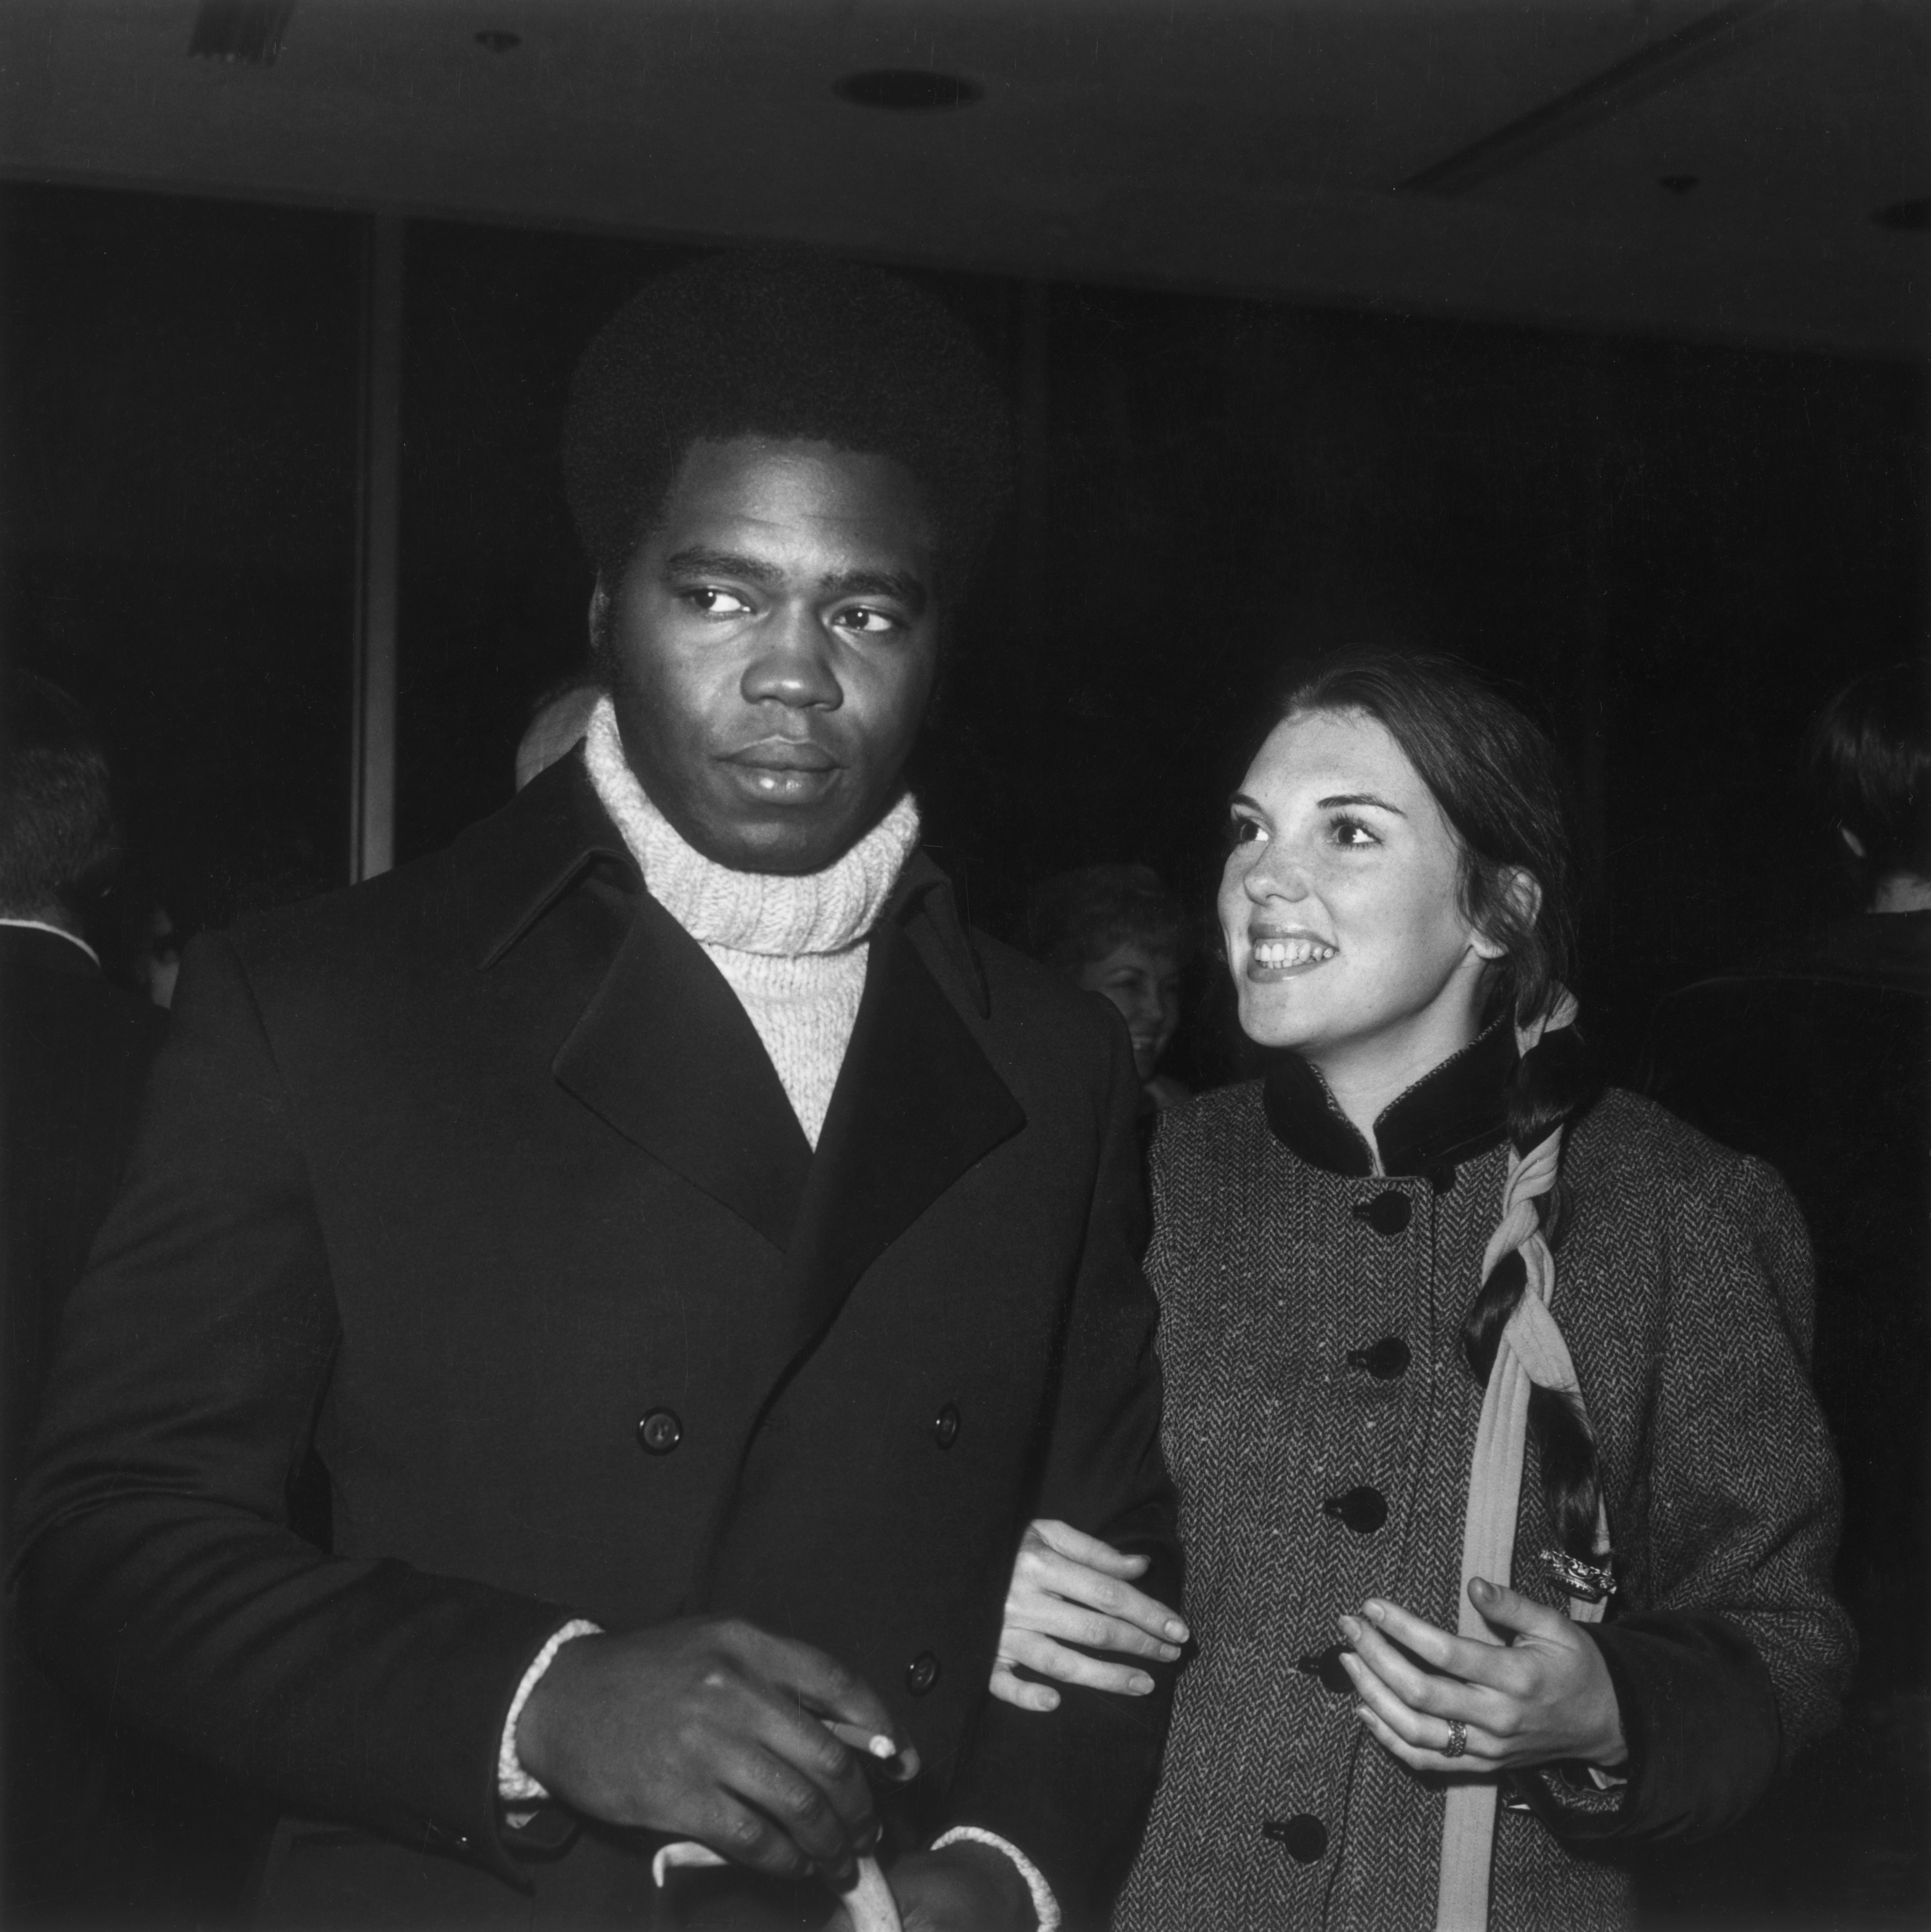 Georg Stanford Brown and Tyne Daly at a  performance of the British National Theatre in London, England in 1975. | Source: Getty Images